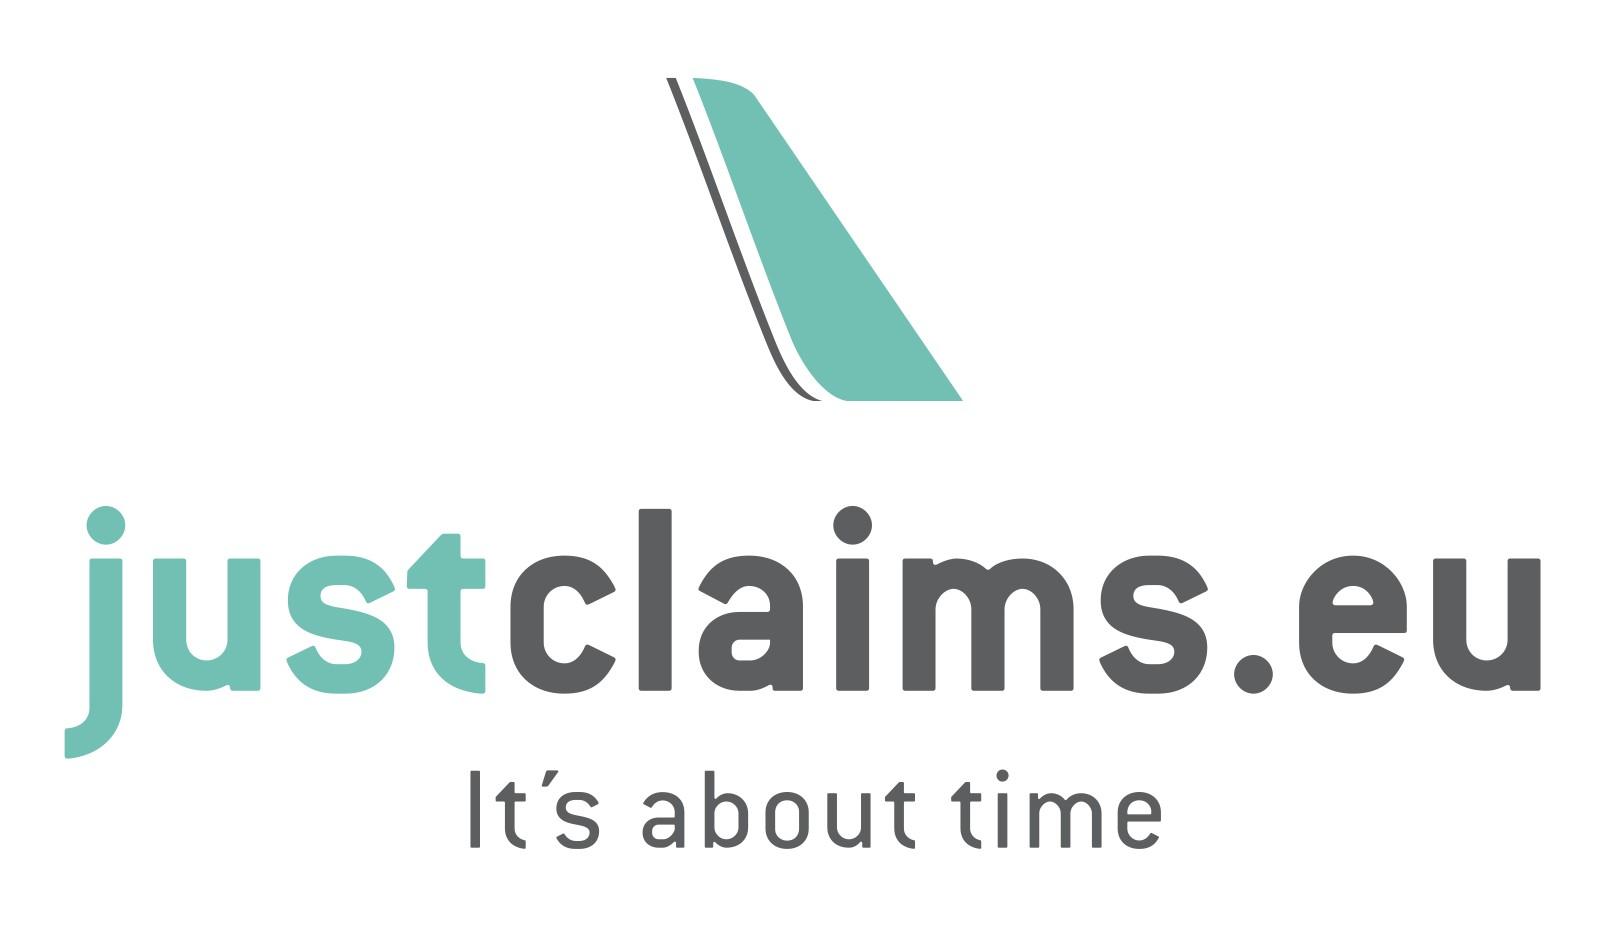 justclaims.eu / startup from Frankfurt am Main / Background